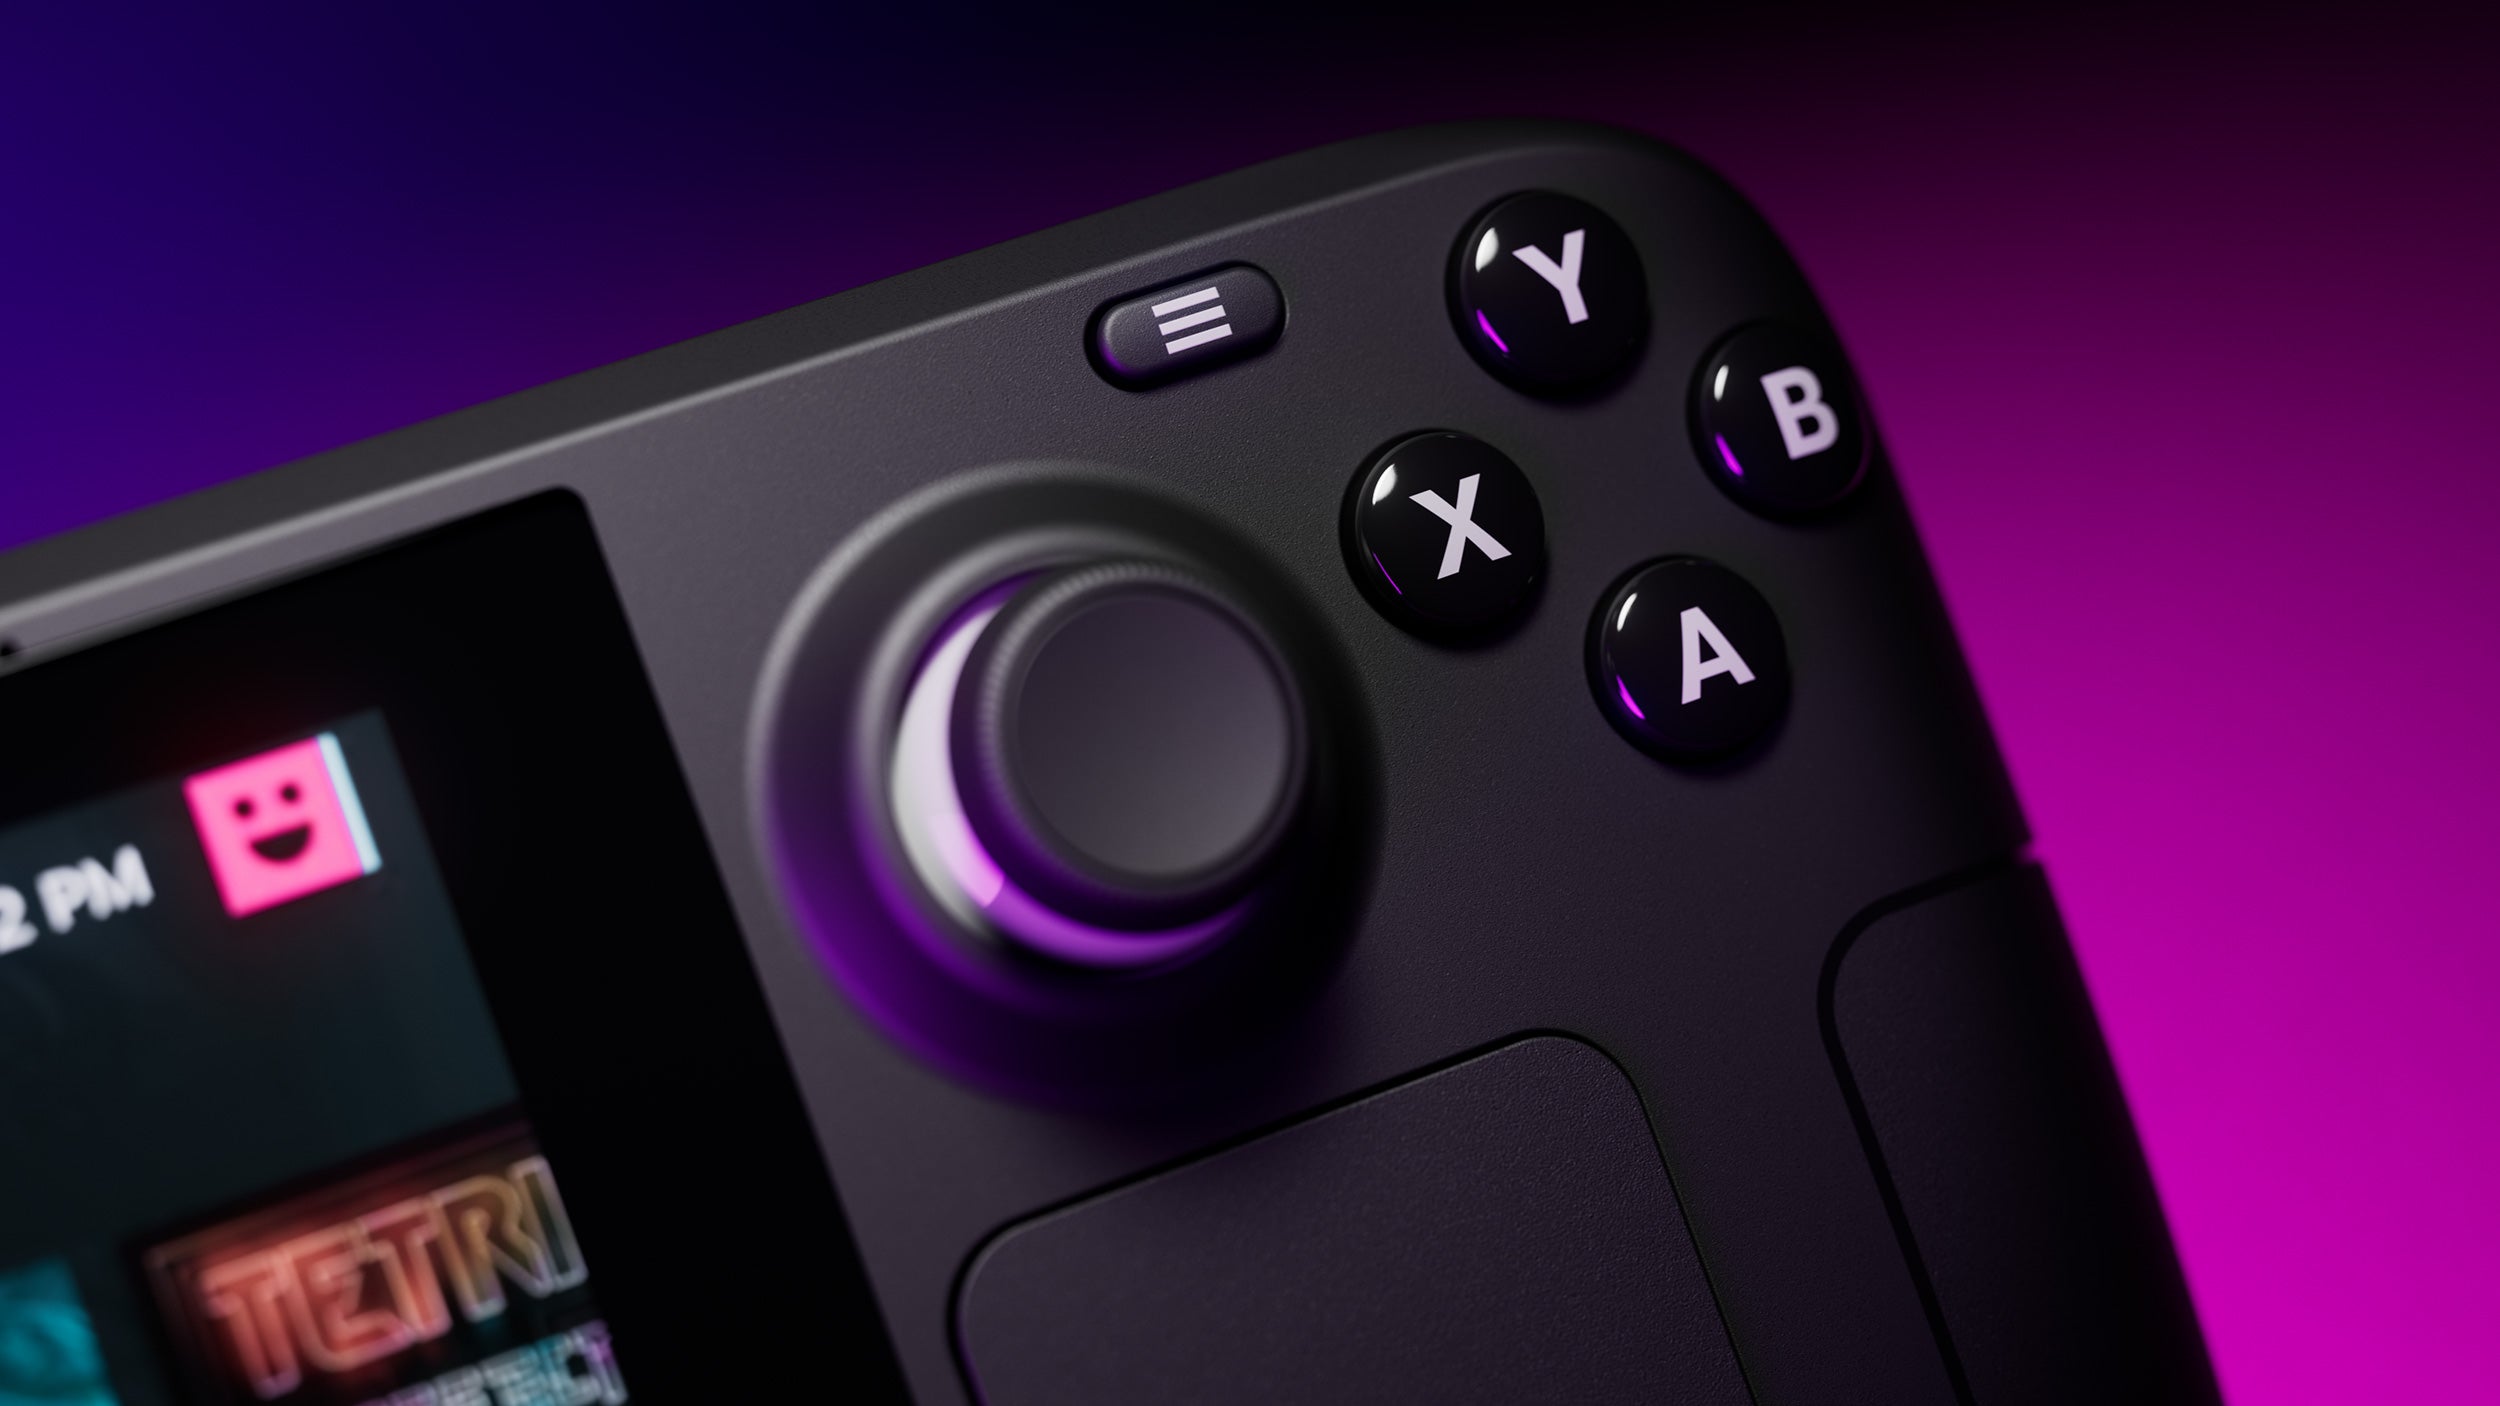 The Steam Deck's right thumbstick and buttons, from an official render.